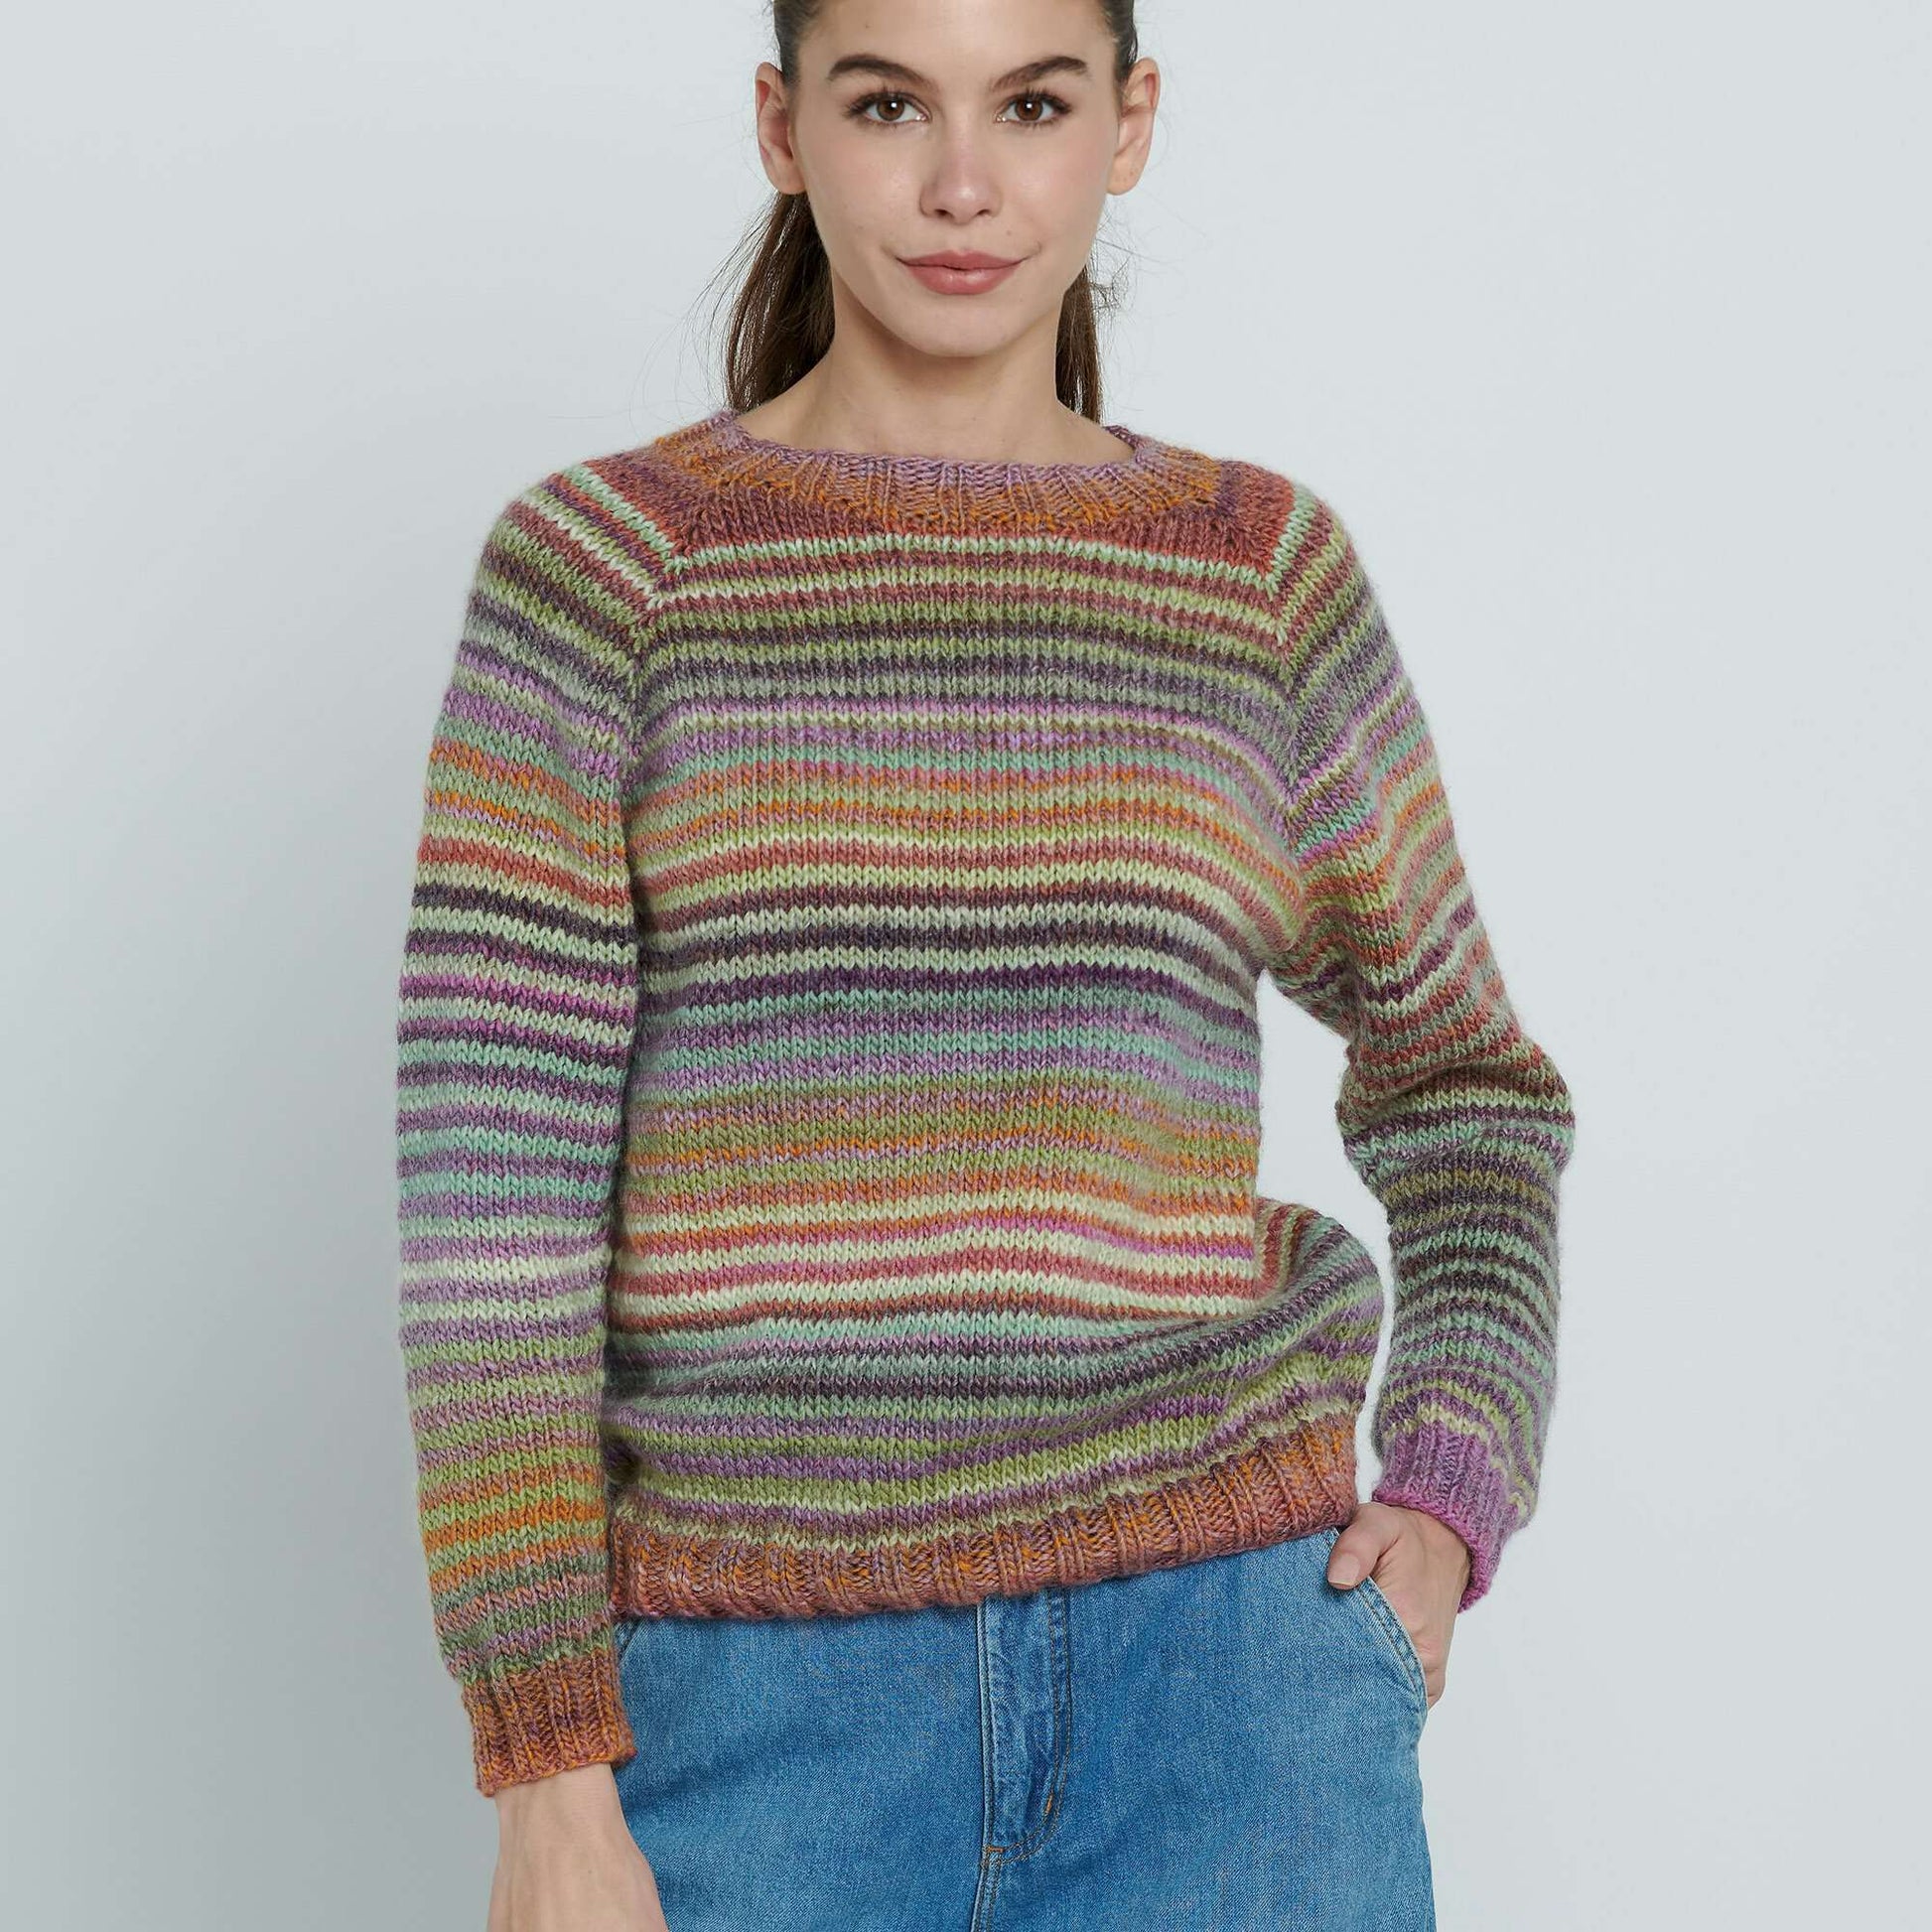 Paitluc Striped Knit Tops Can Create So Many Different Looks